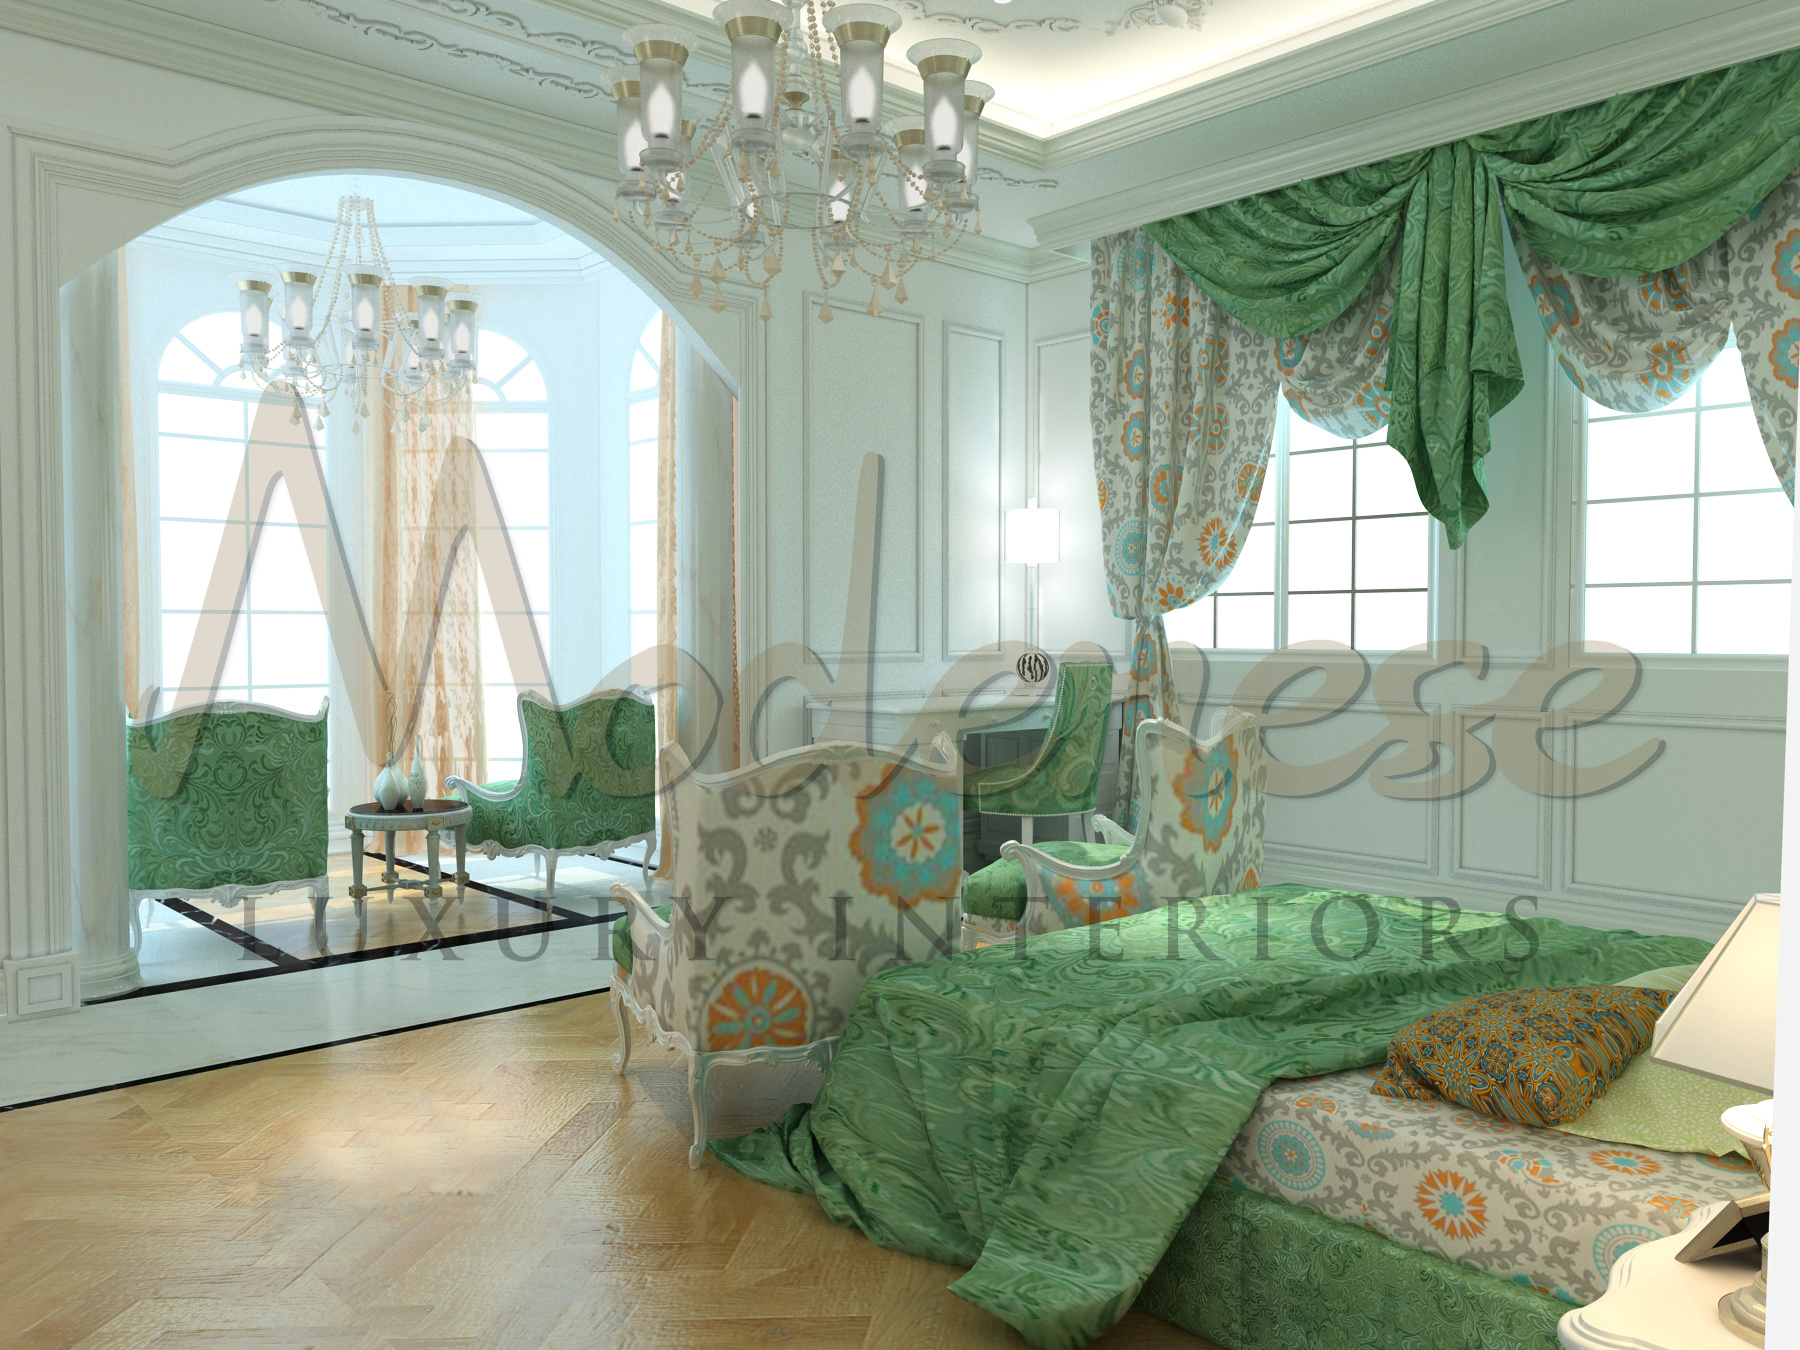 Green Accents with White For Luxurious Bedroom